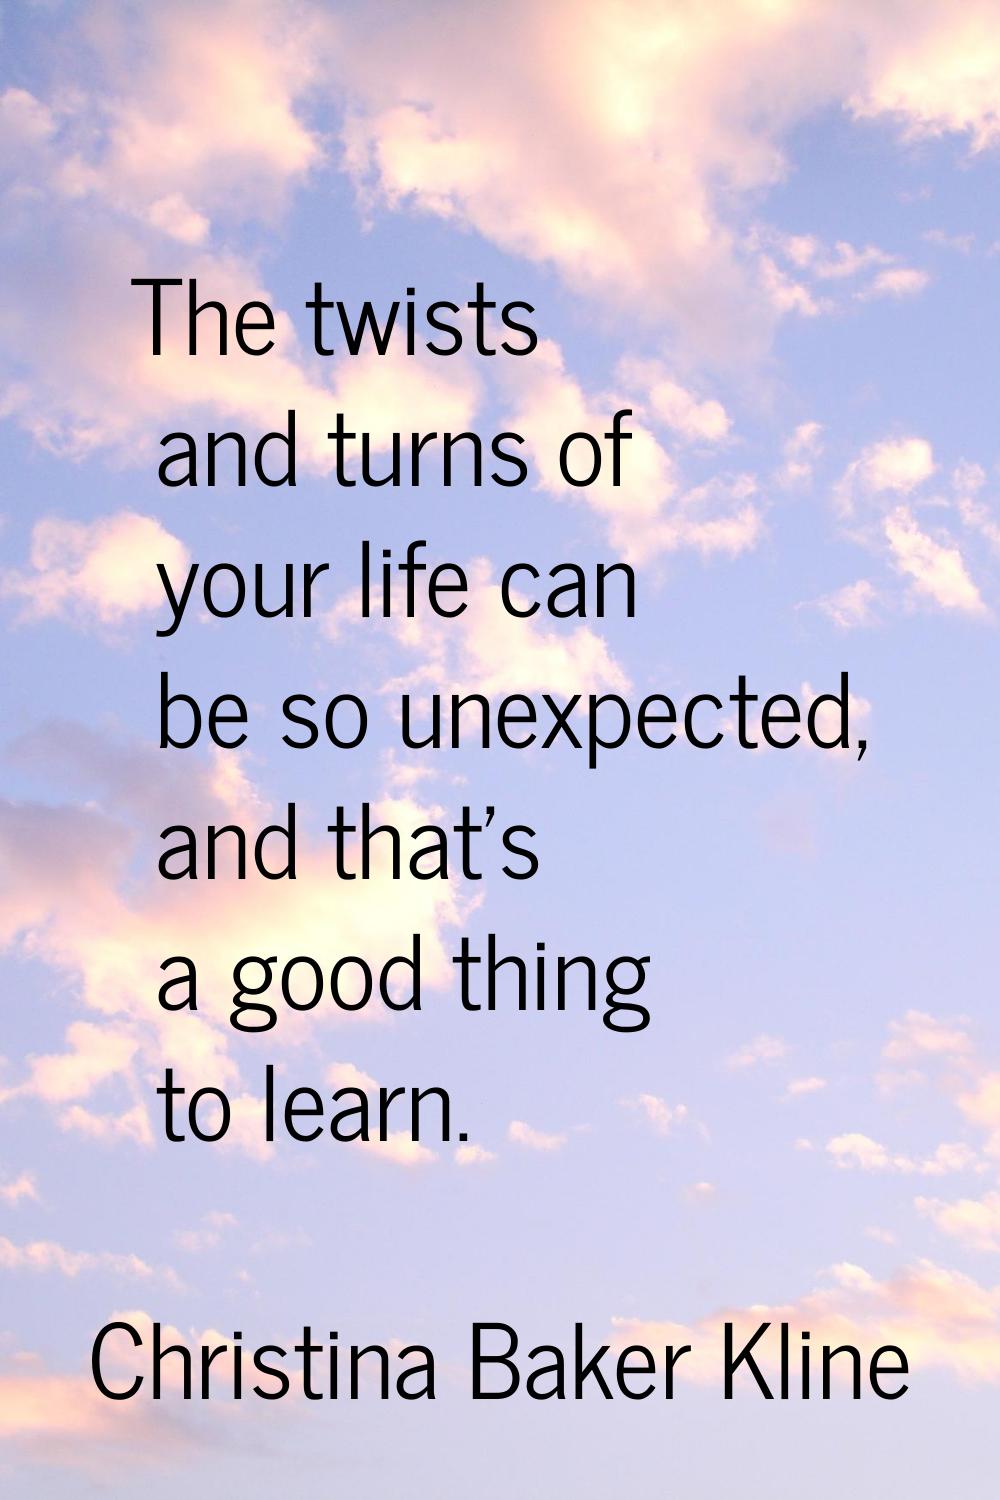 The twists and turns of your life can be so unexpected, and that's a good thing to learn.